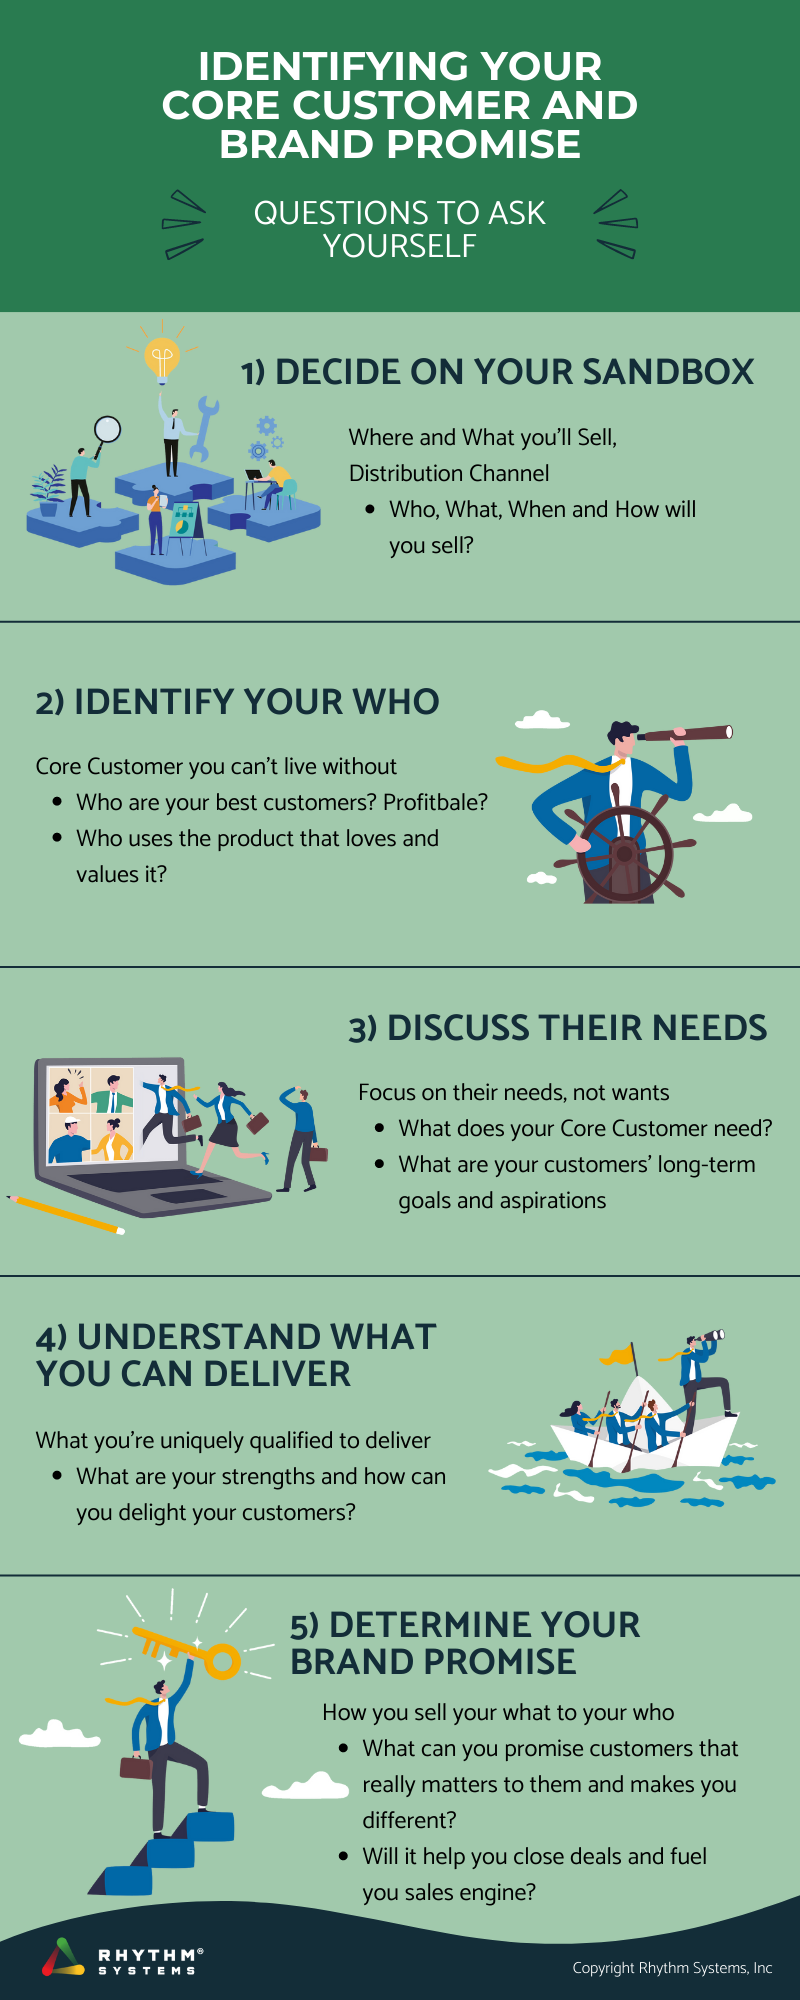 Identifying Your Core Customer and Brand Promise